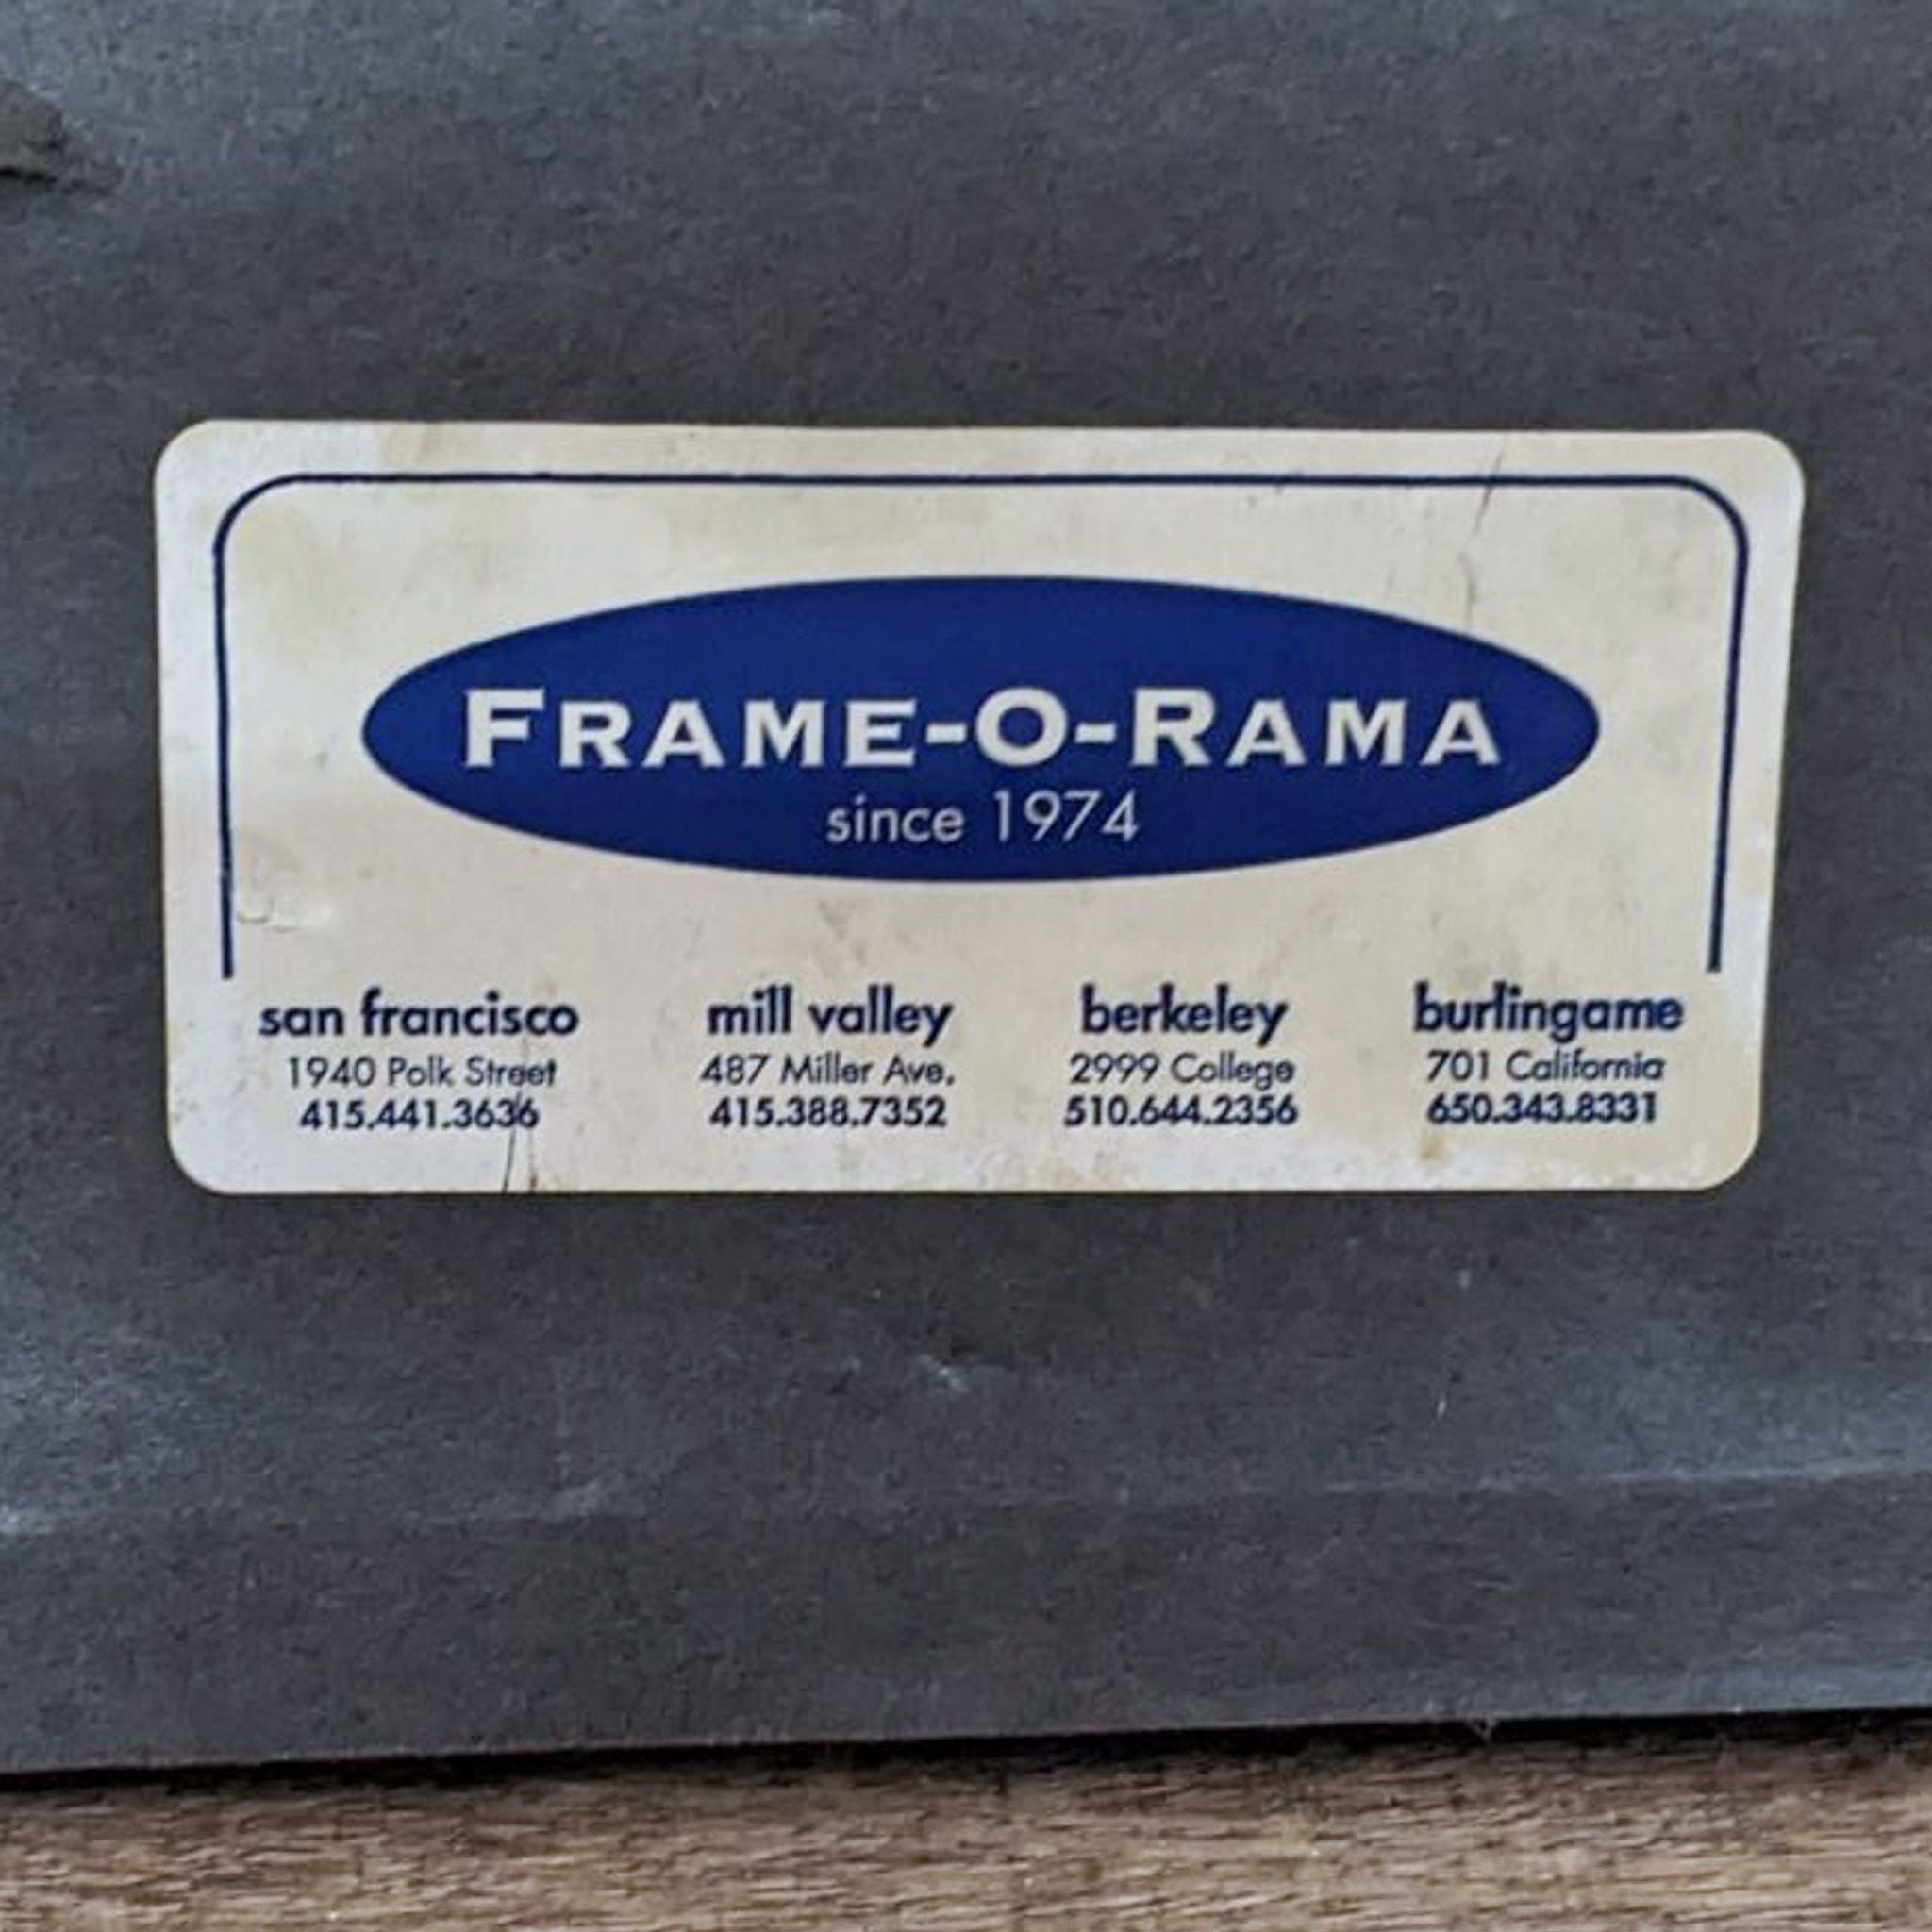 Label from FRAME-O-RAMA on a picture frame listing multiple locations and contact numbers.